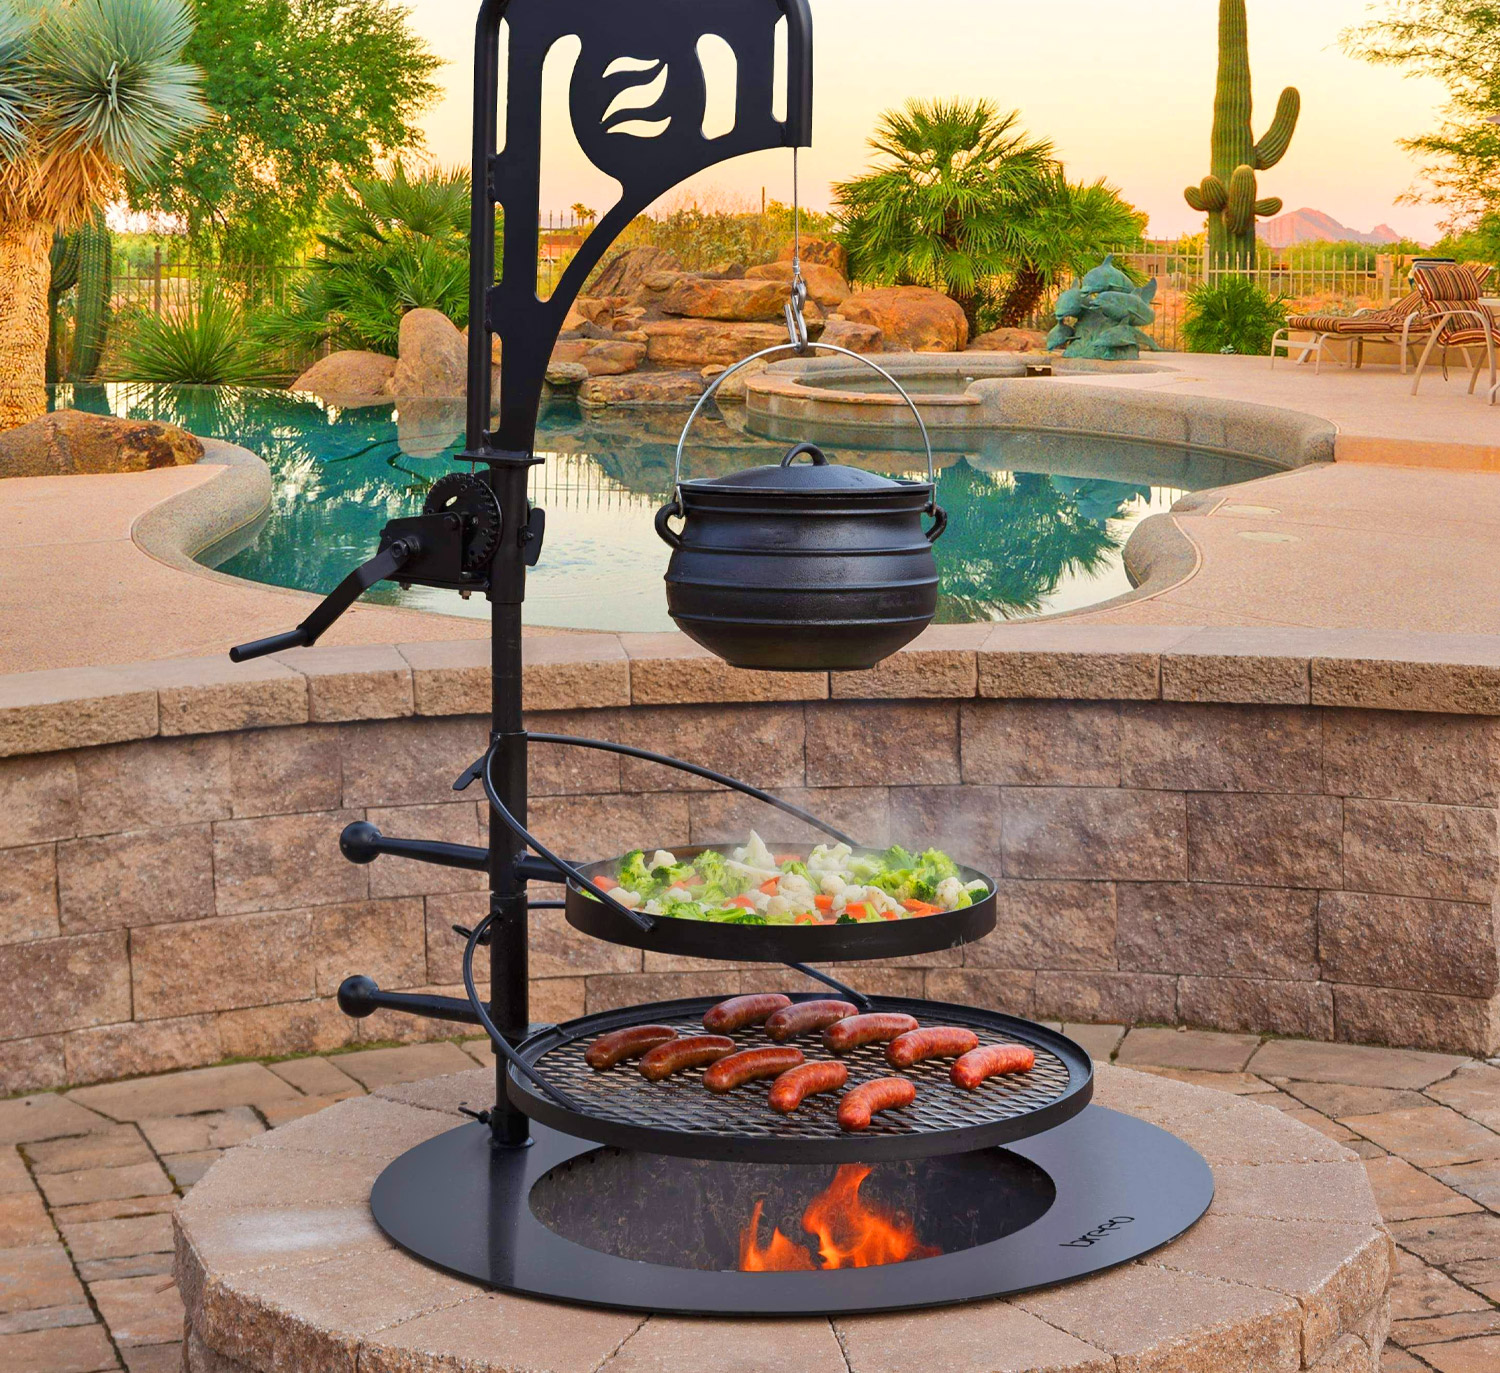 Fire Pit Into A Tiered Cooking Machine, How To Turn A Charcoal Grill Into A Fire Pit